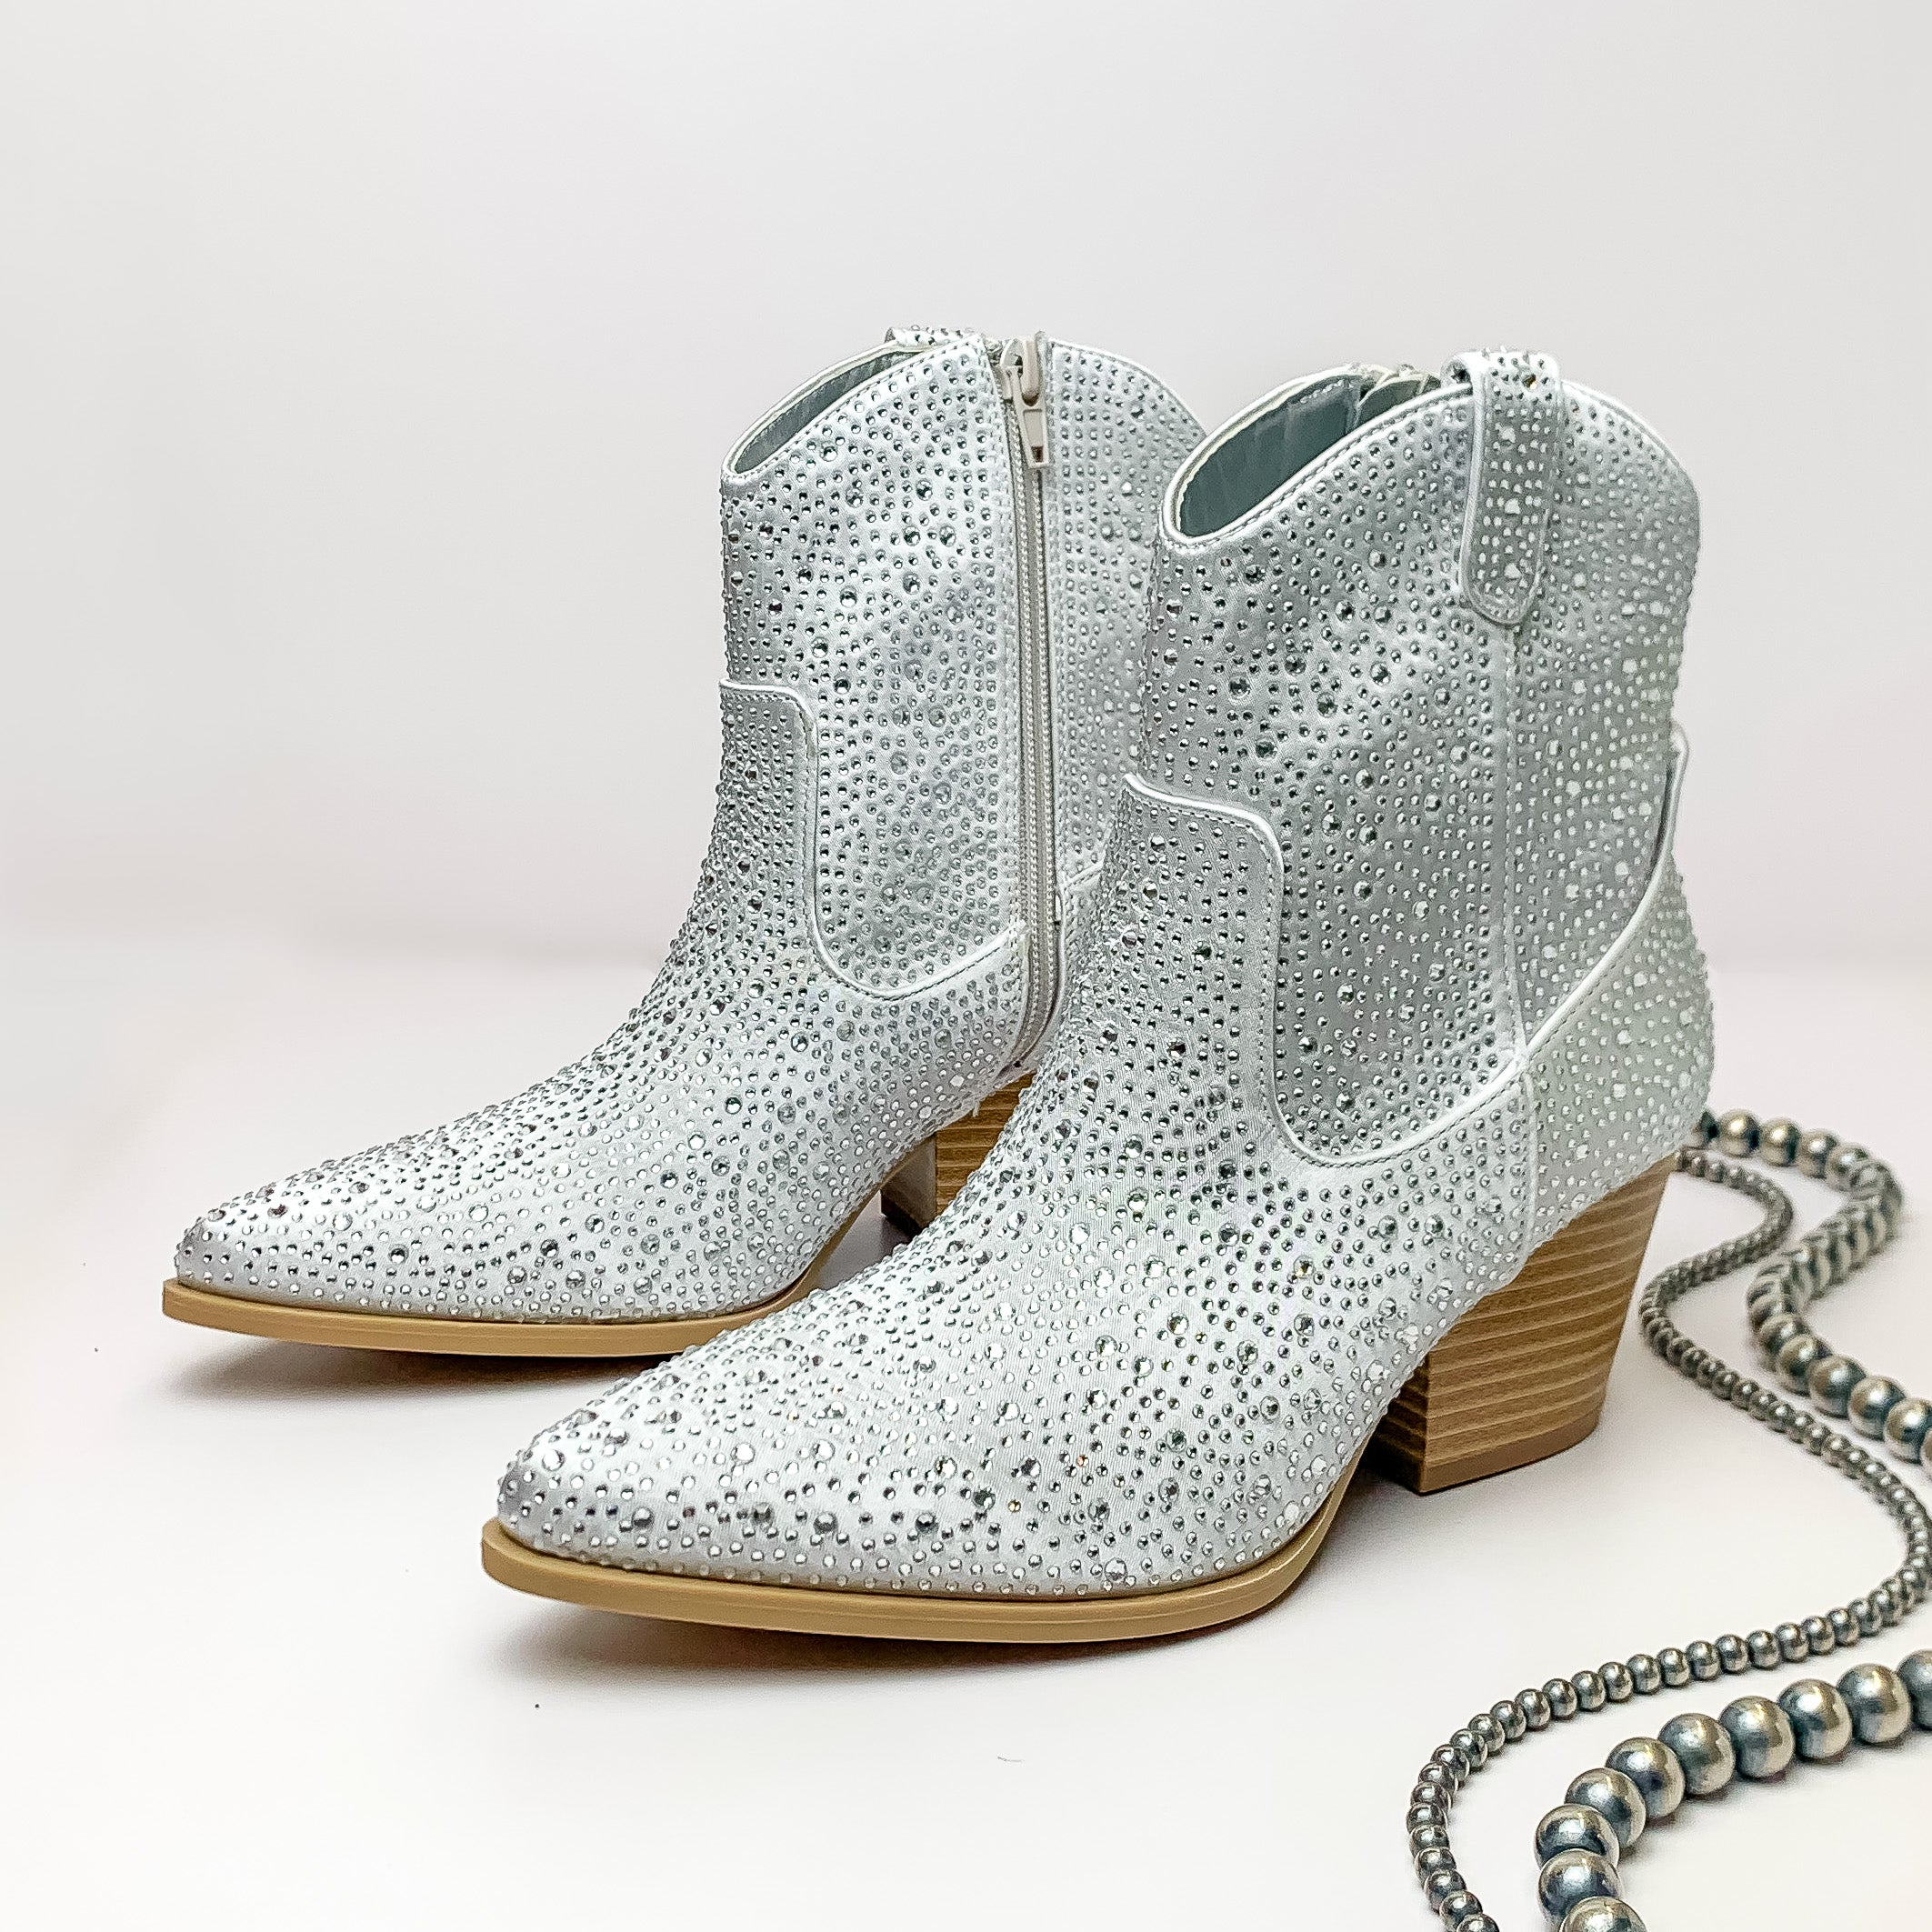 Nashville Sparkle Heeled Ankle Booties with Clear Crystals in Silver. Pictured on a white background with jewelry laying on the platform. 